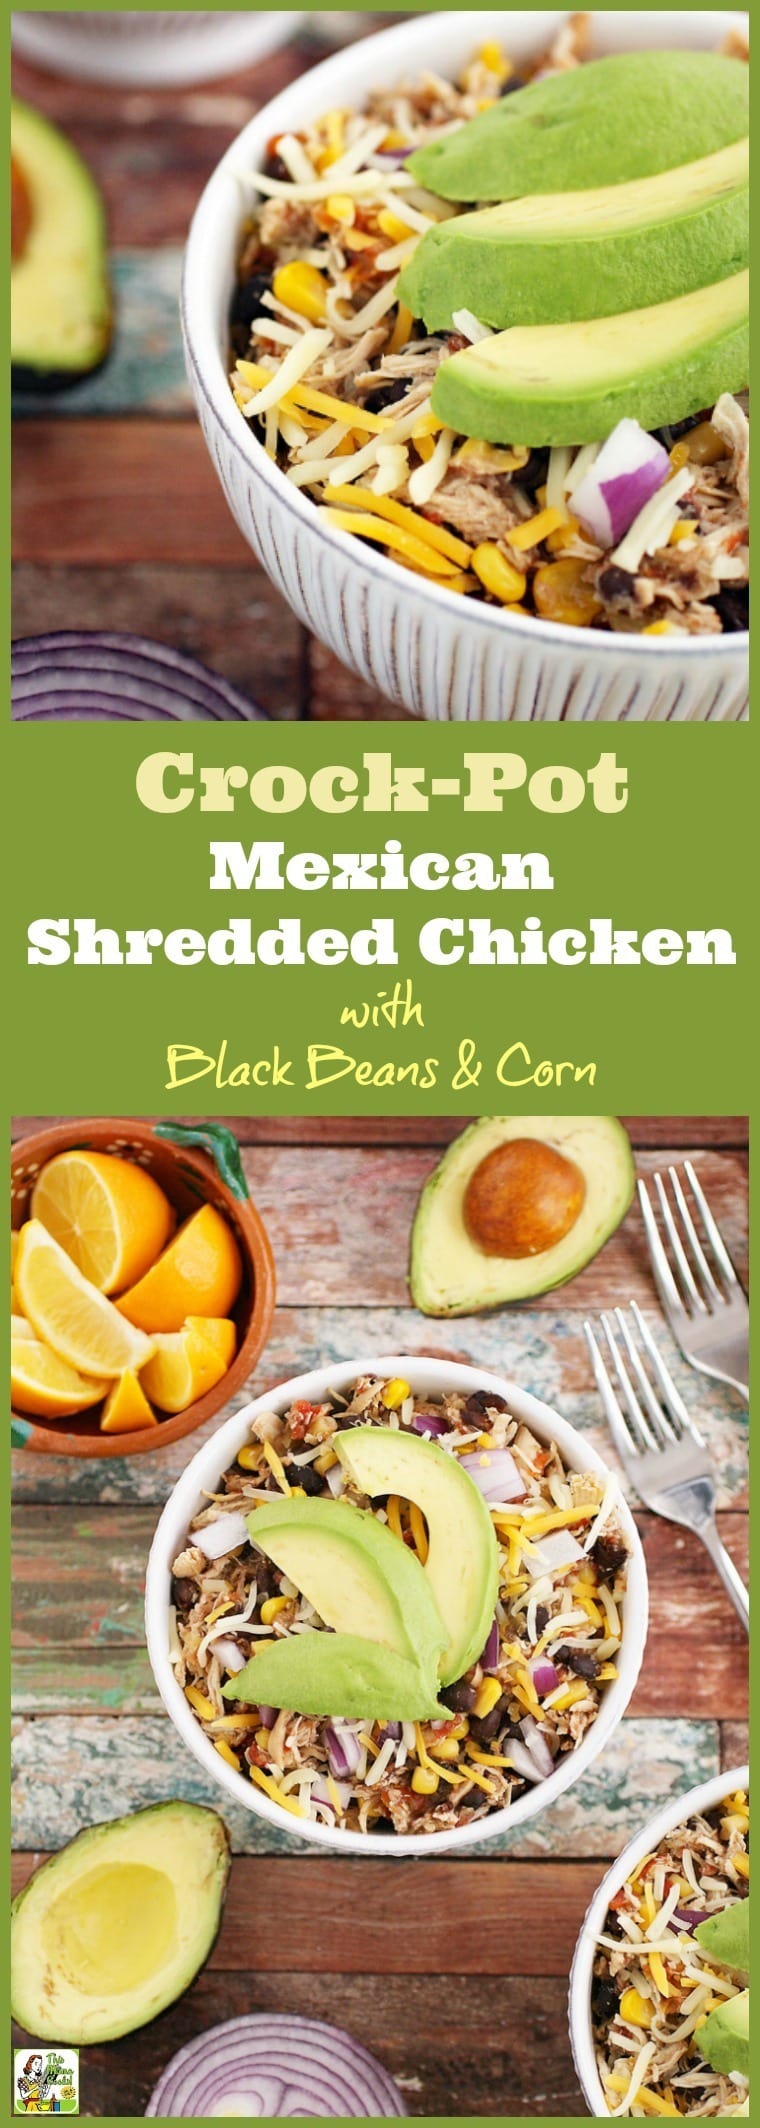 Crock-Pot Mexican Shredded Chicken with Black Beans & Corn